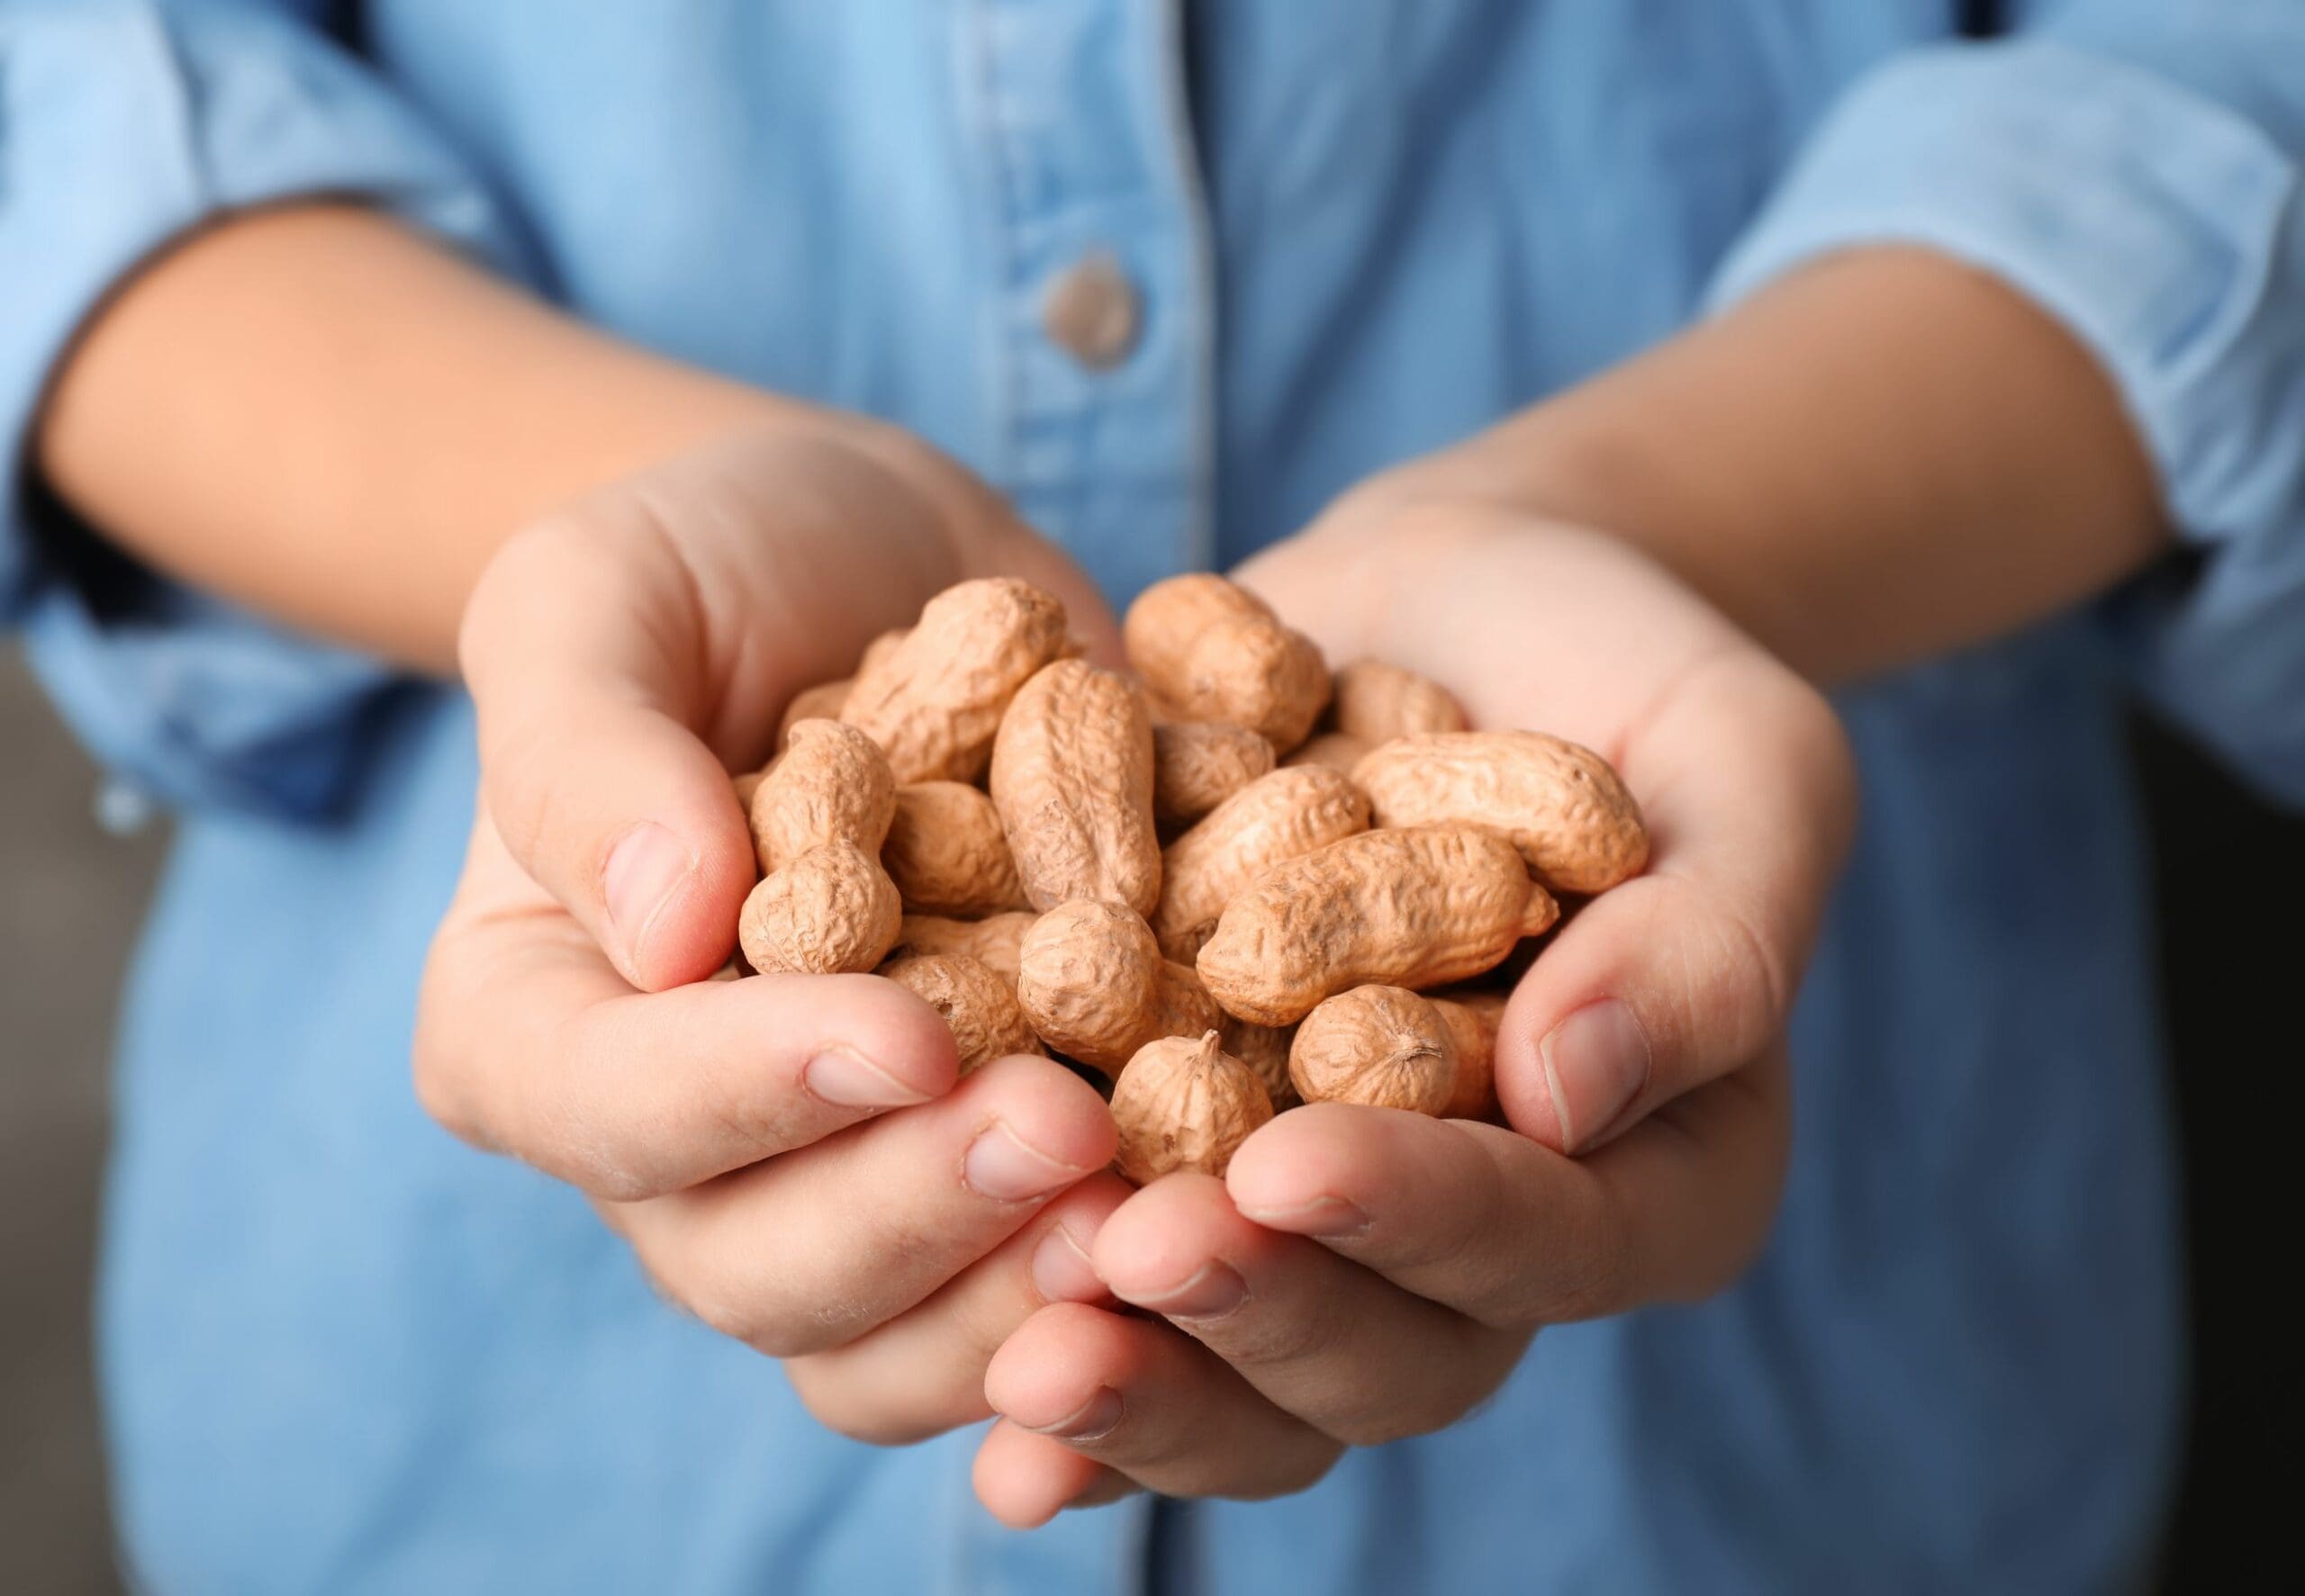 Can eating peanuts cure a peanut allergy?